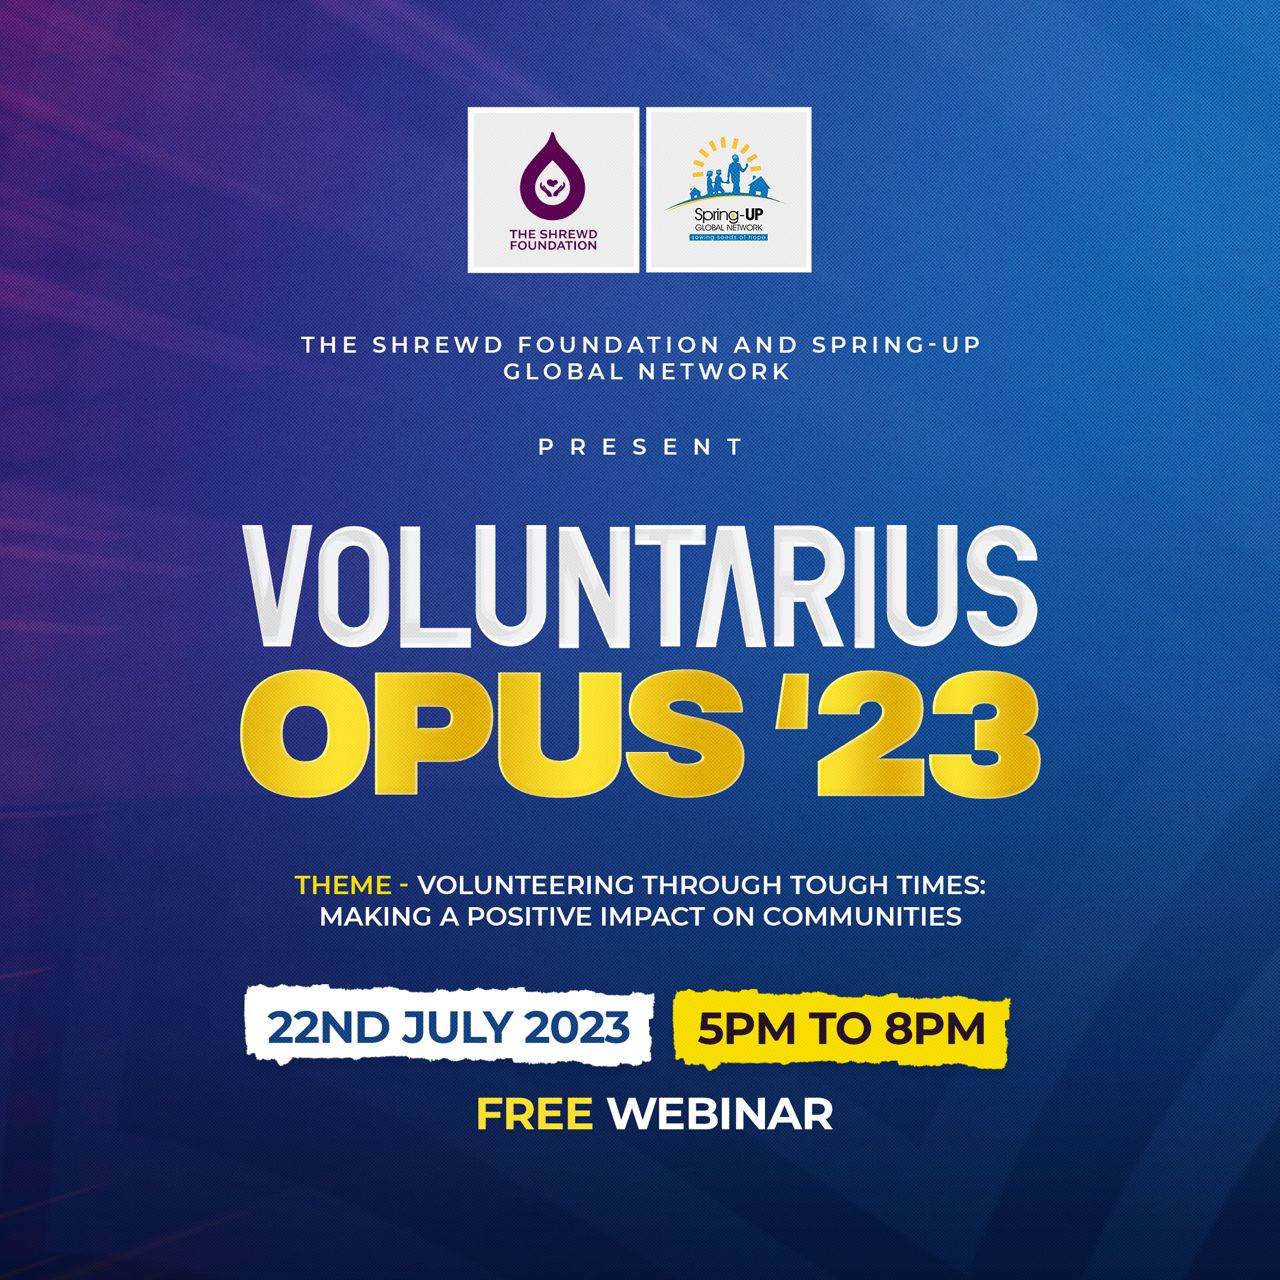 What you need to know about Voluntarius Opus’23